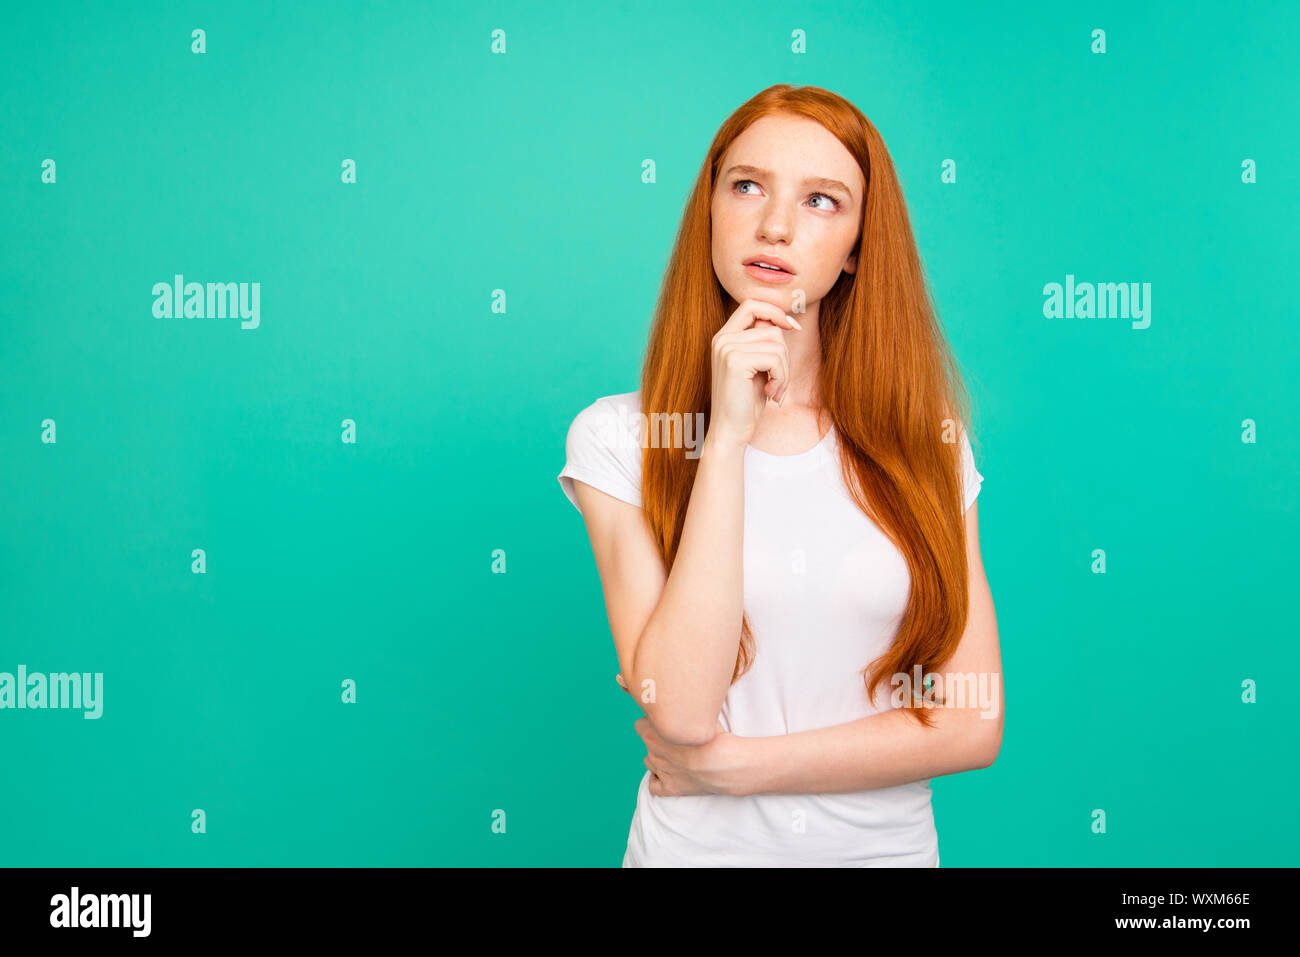 Photo of confused person with long hair, stand in white t-shirt Stock Photo